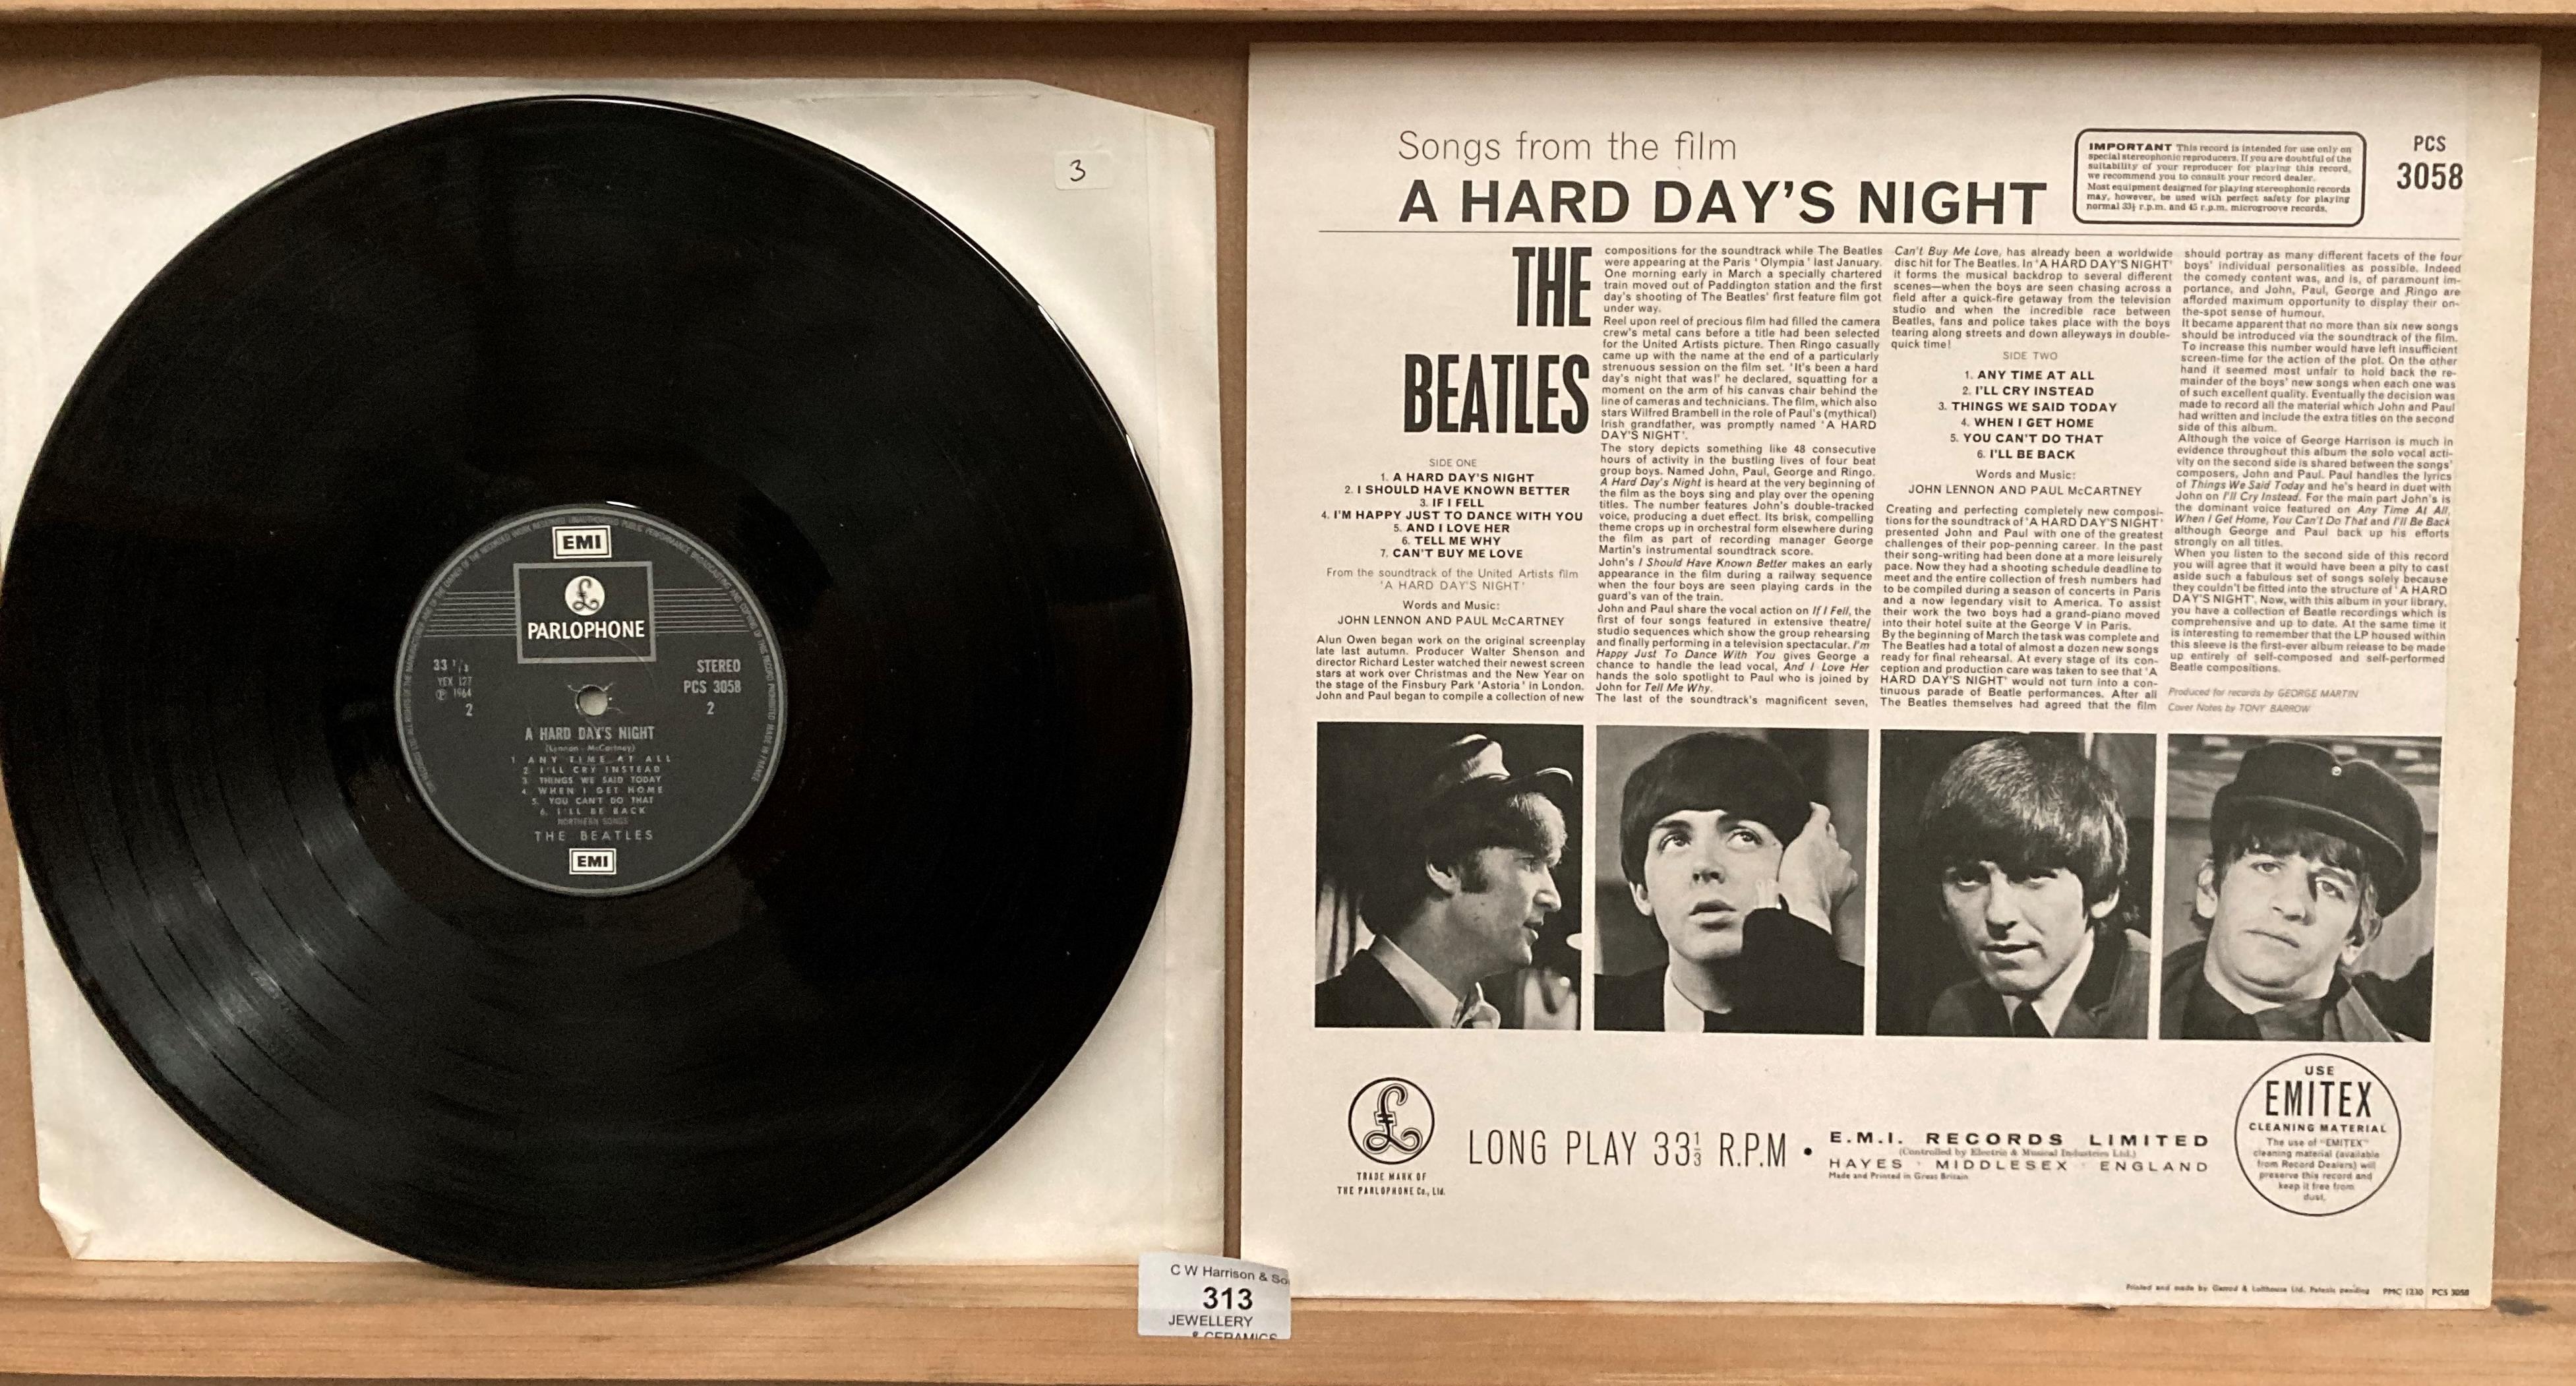 The Beatles LP 'A Hard Days Night' on Parlophone EMI Records PCS 3058 (saleroom location: S3 behind - Image 2 of 2